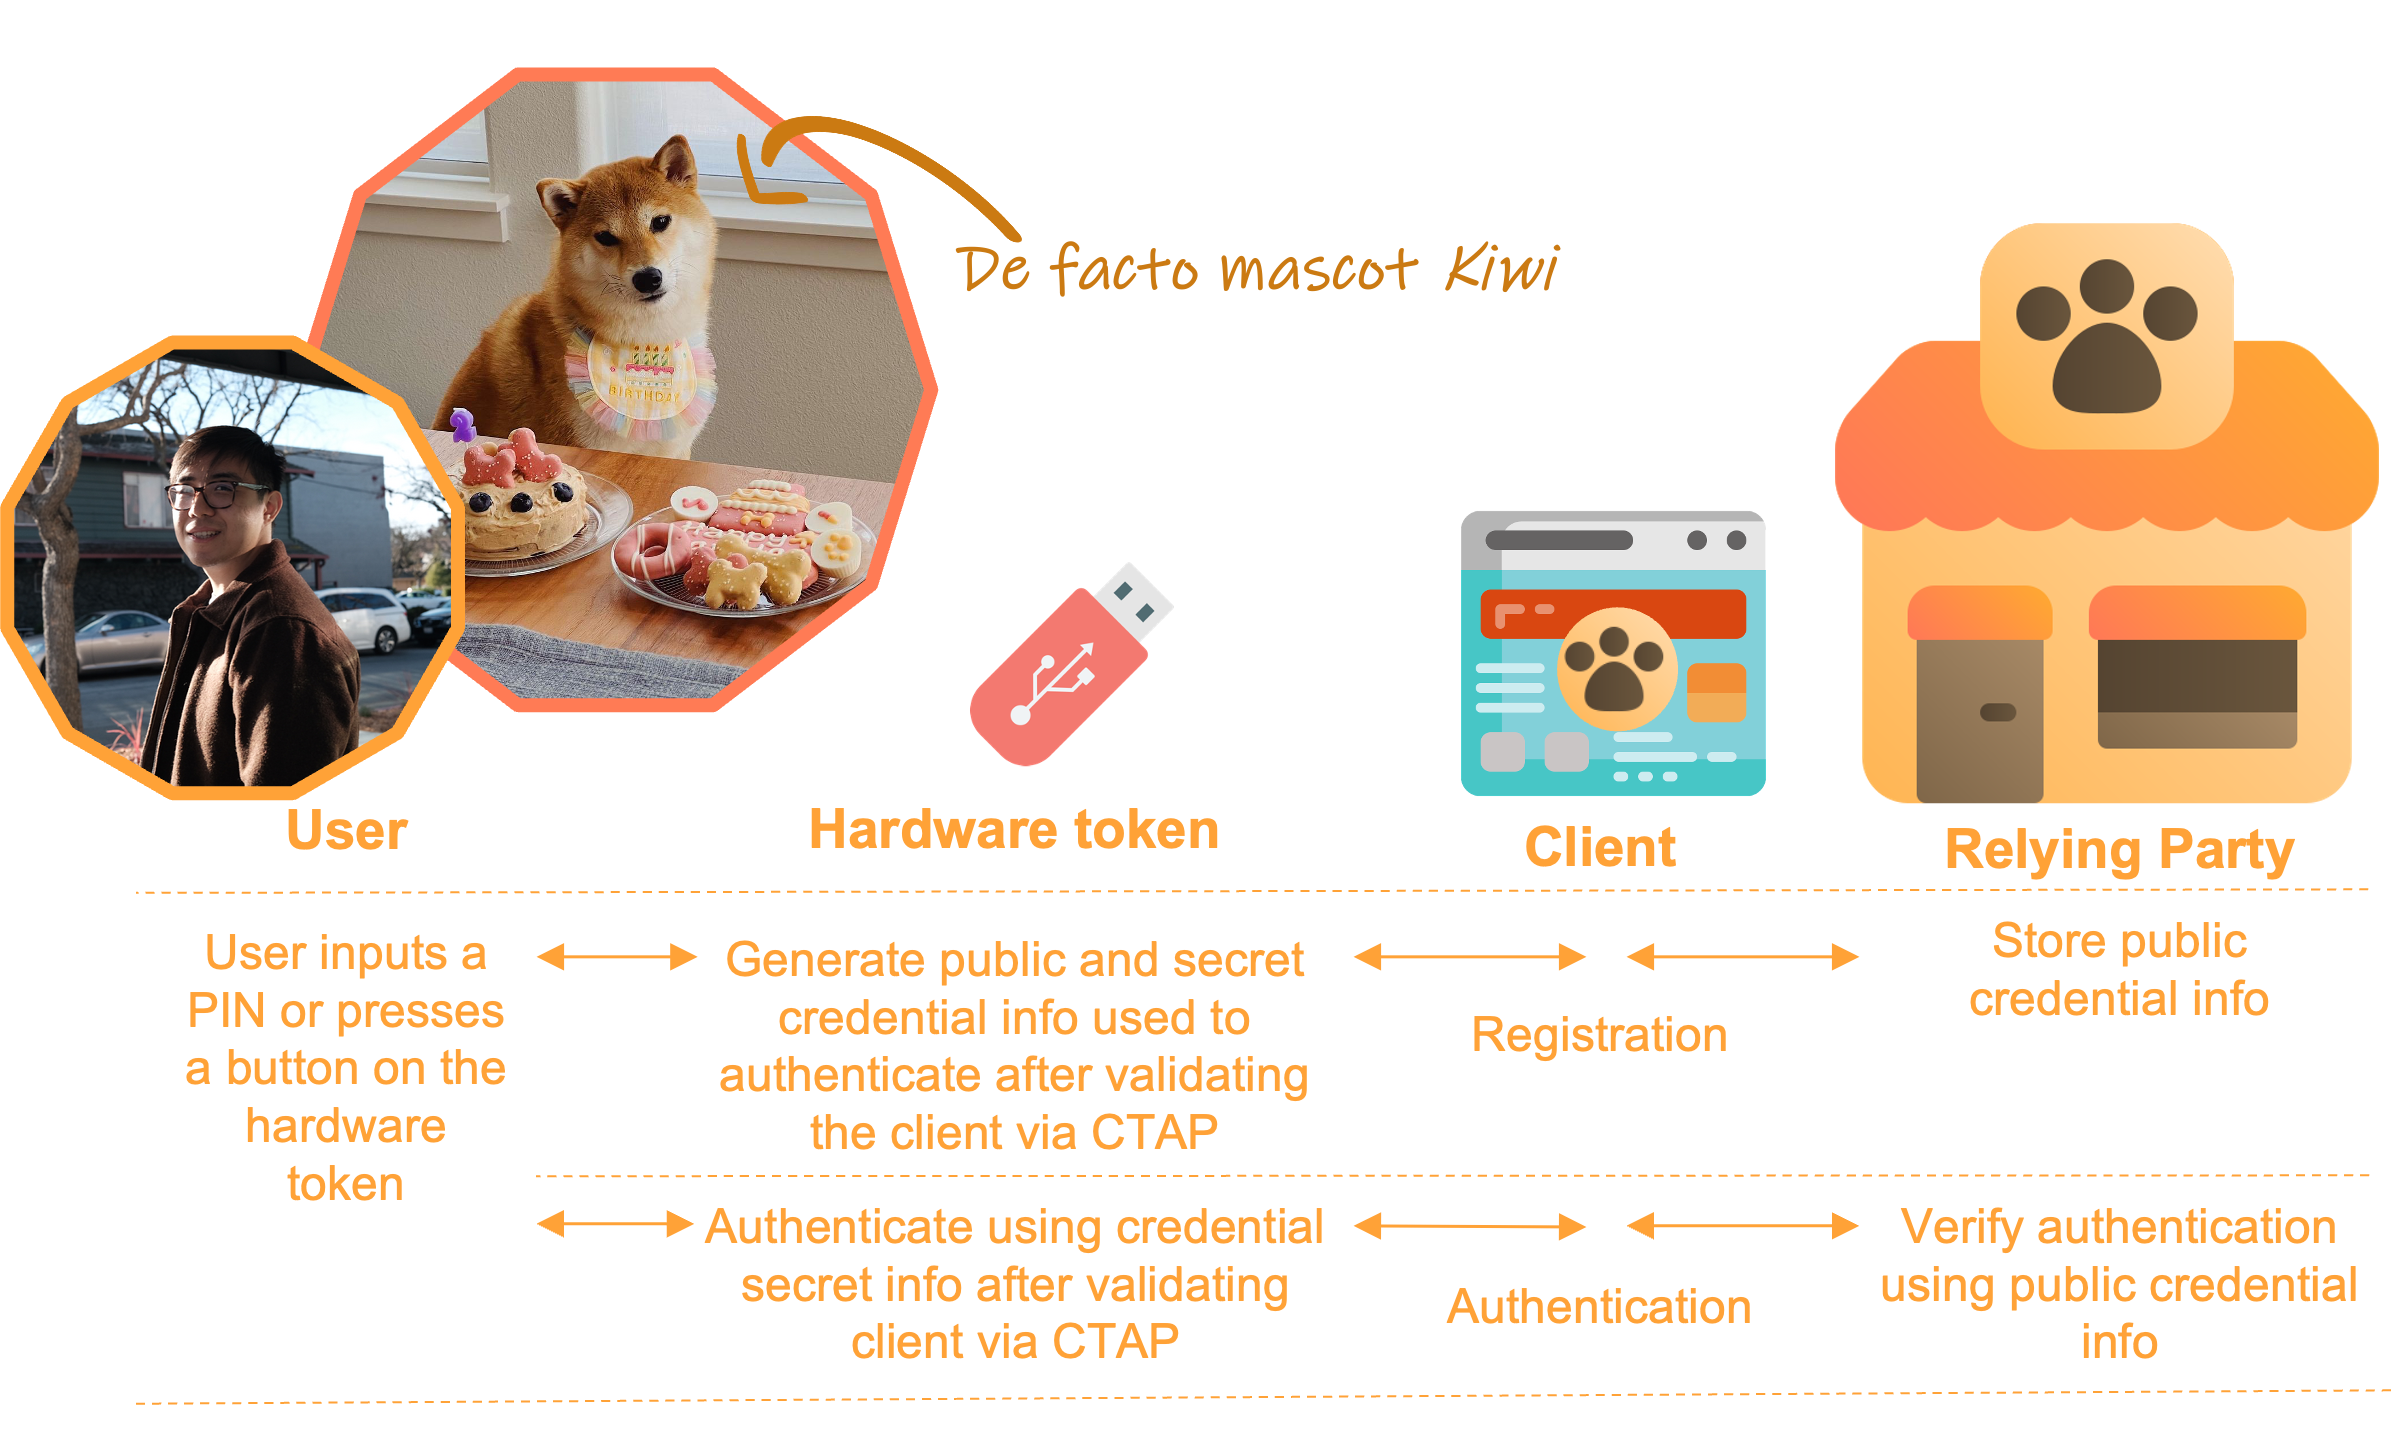 You can find here our very own Steven, author of blog posts about NTT and Kyber, using a FIDO2 hardware token to log into the pet store to buy the ingredients to make a cake for Kiwi’s birthday. We had to adapt our usual icons to match Kiwi’s cuteness, we hope you understand.